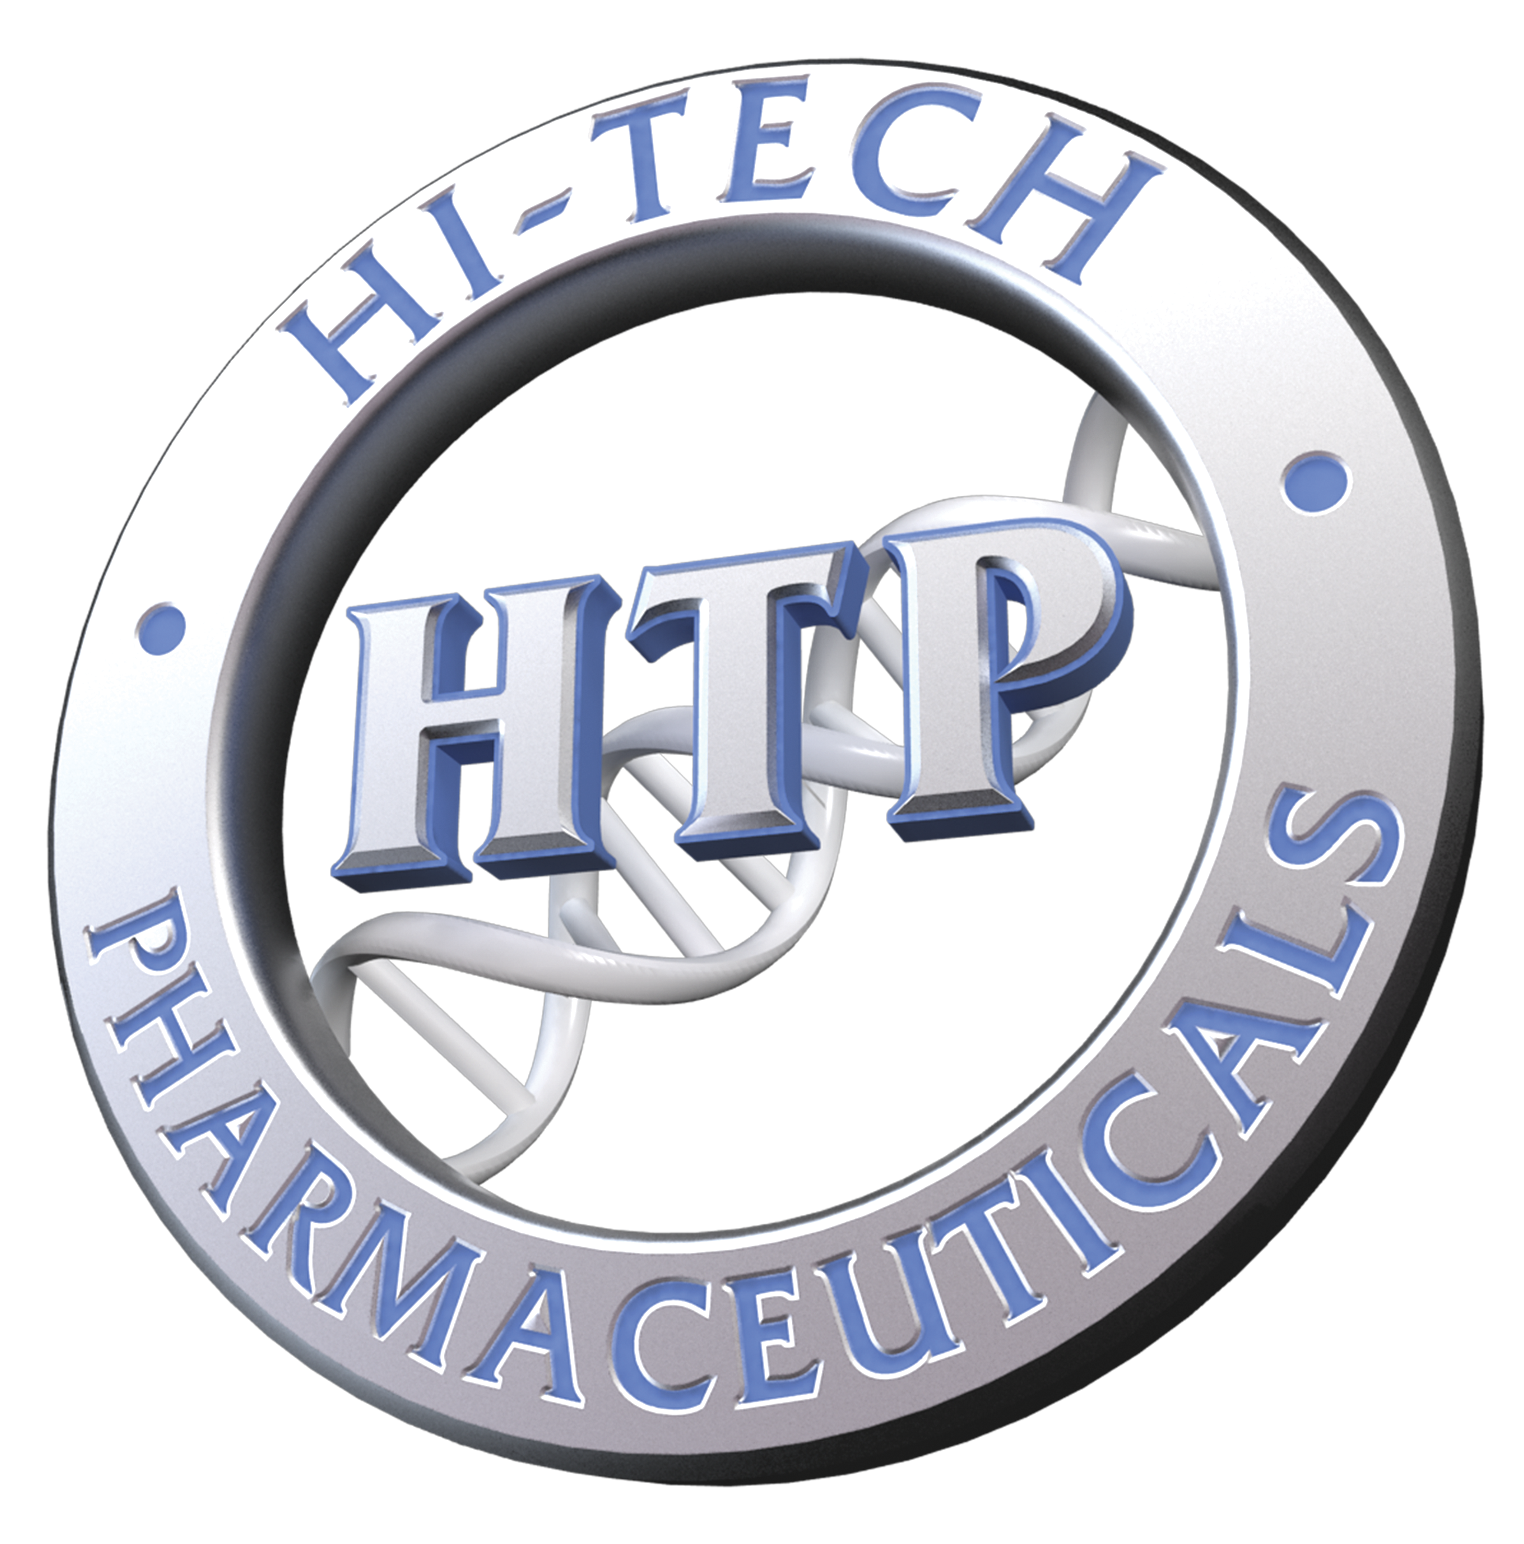 Hi-Tech Pharmaceuticals Wins Almost $1 Million in Legal Fees From Thermolife and Stanford